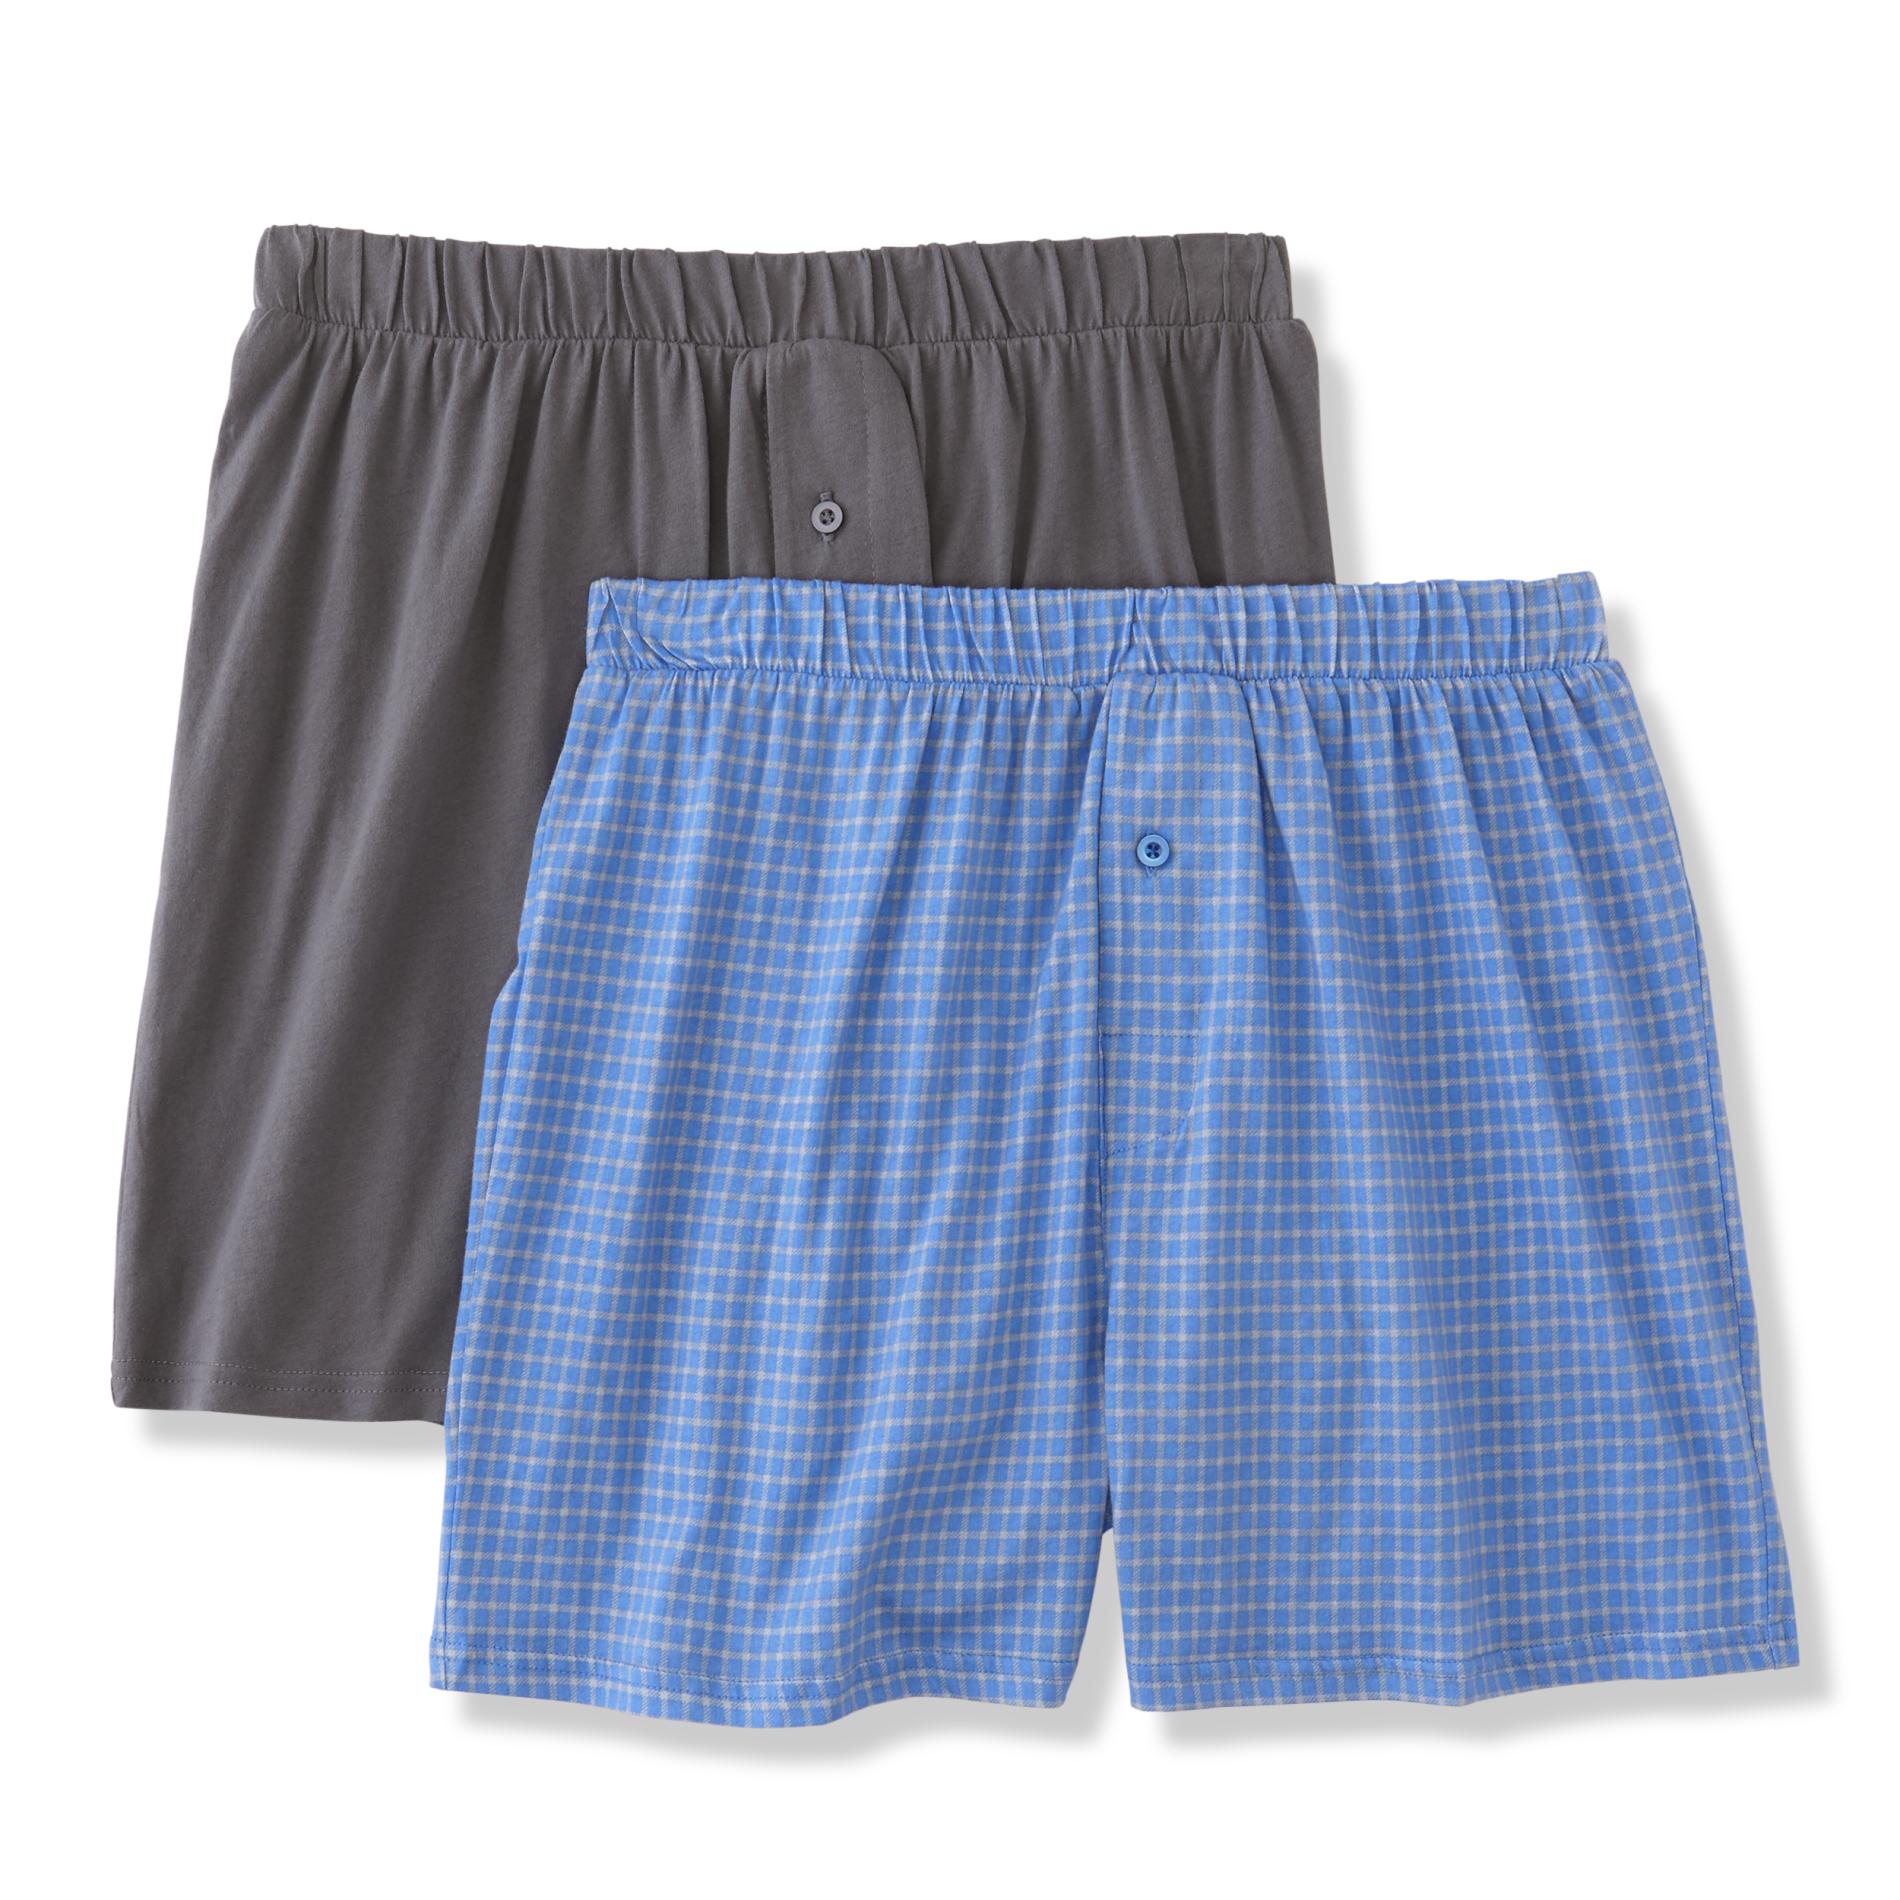 Simply Styled Men's 2-Pack Knit Boxer Shorts - Plaid